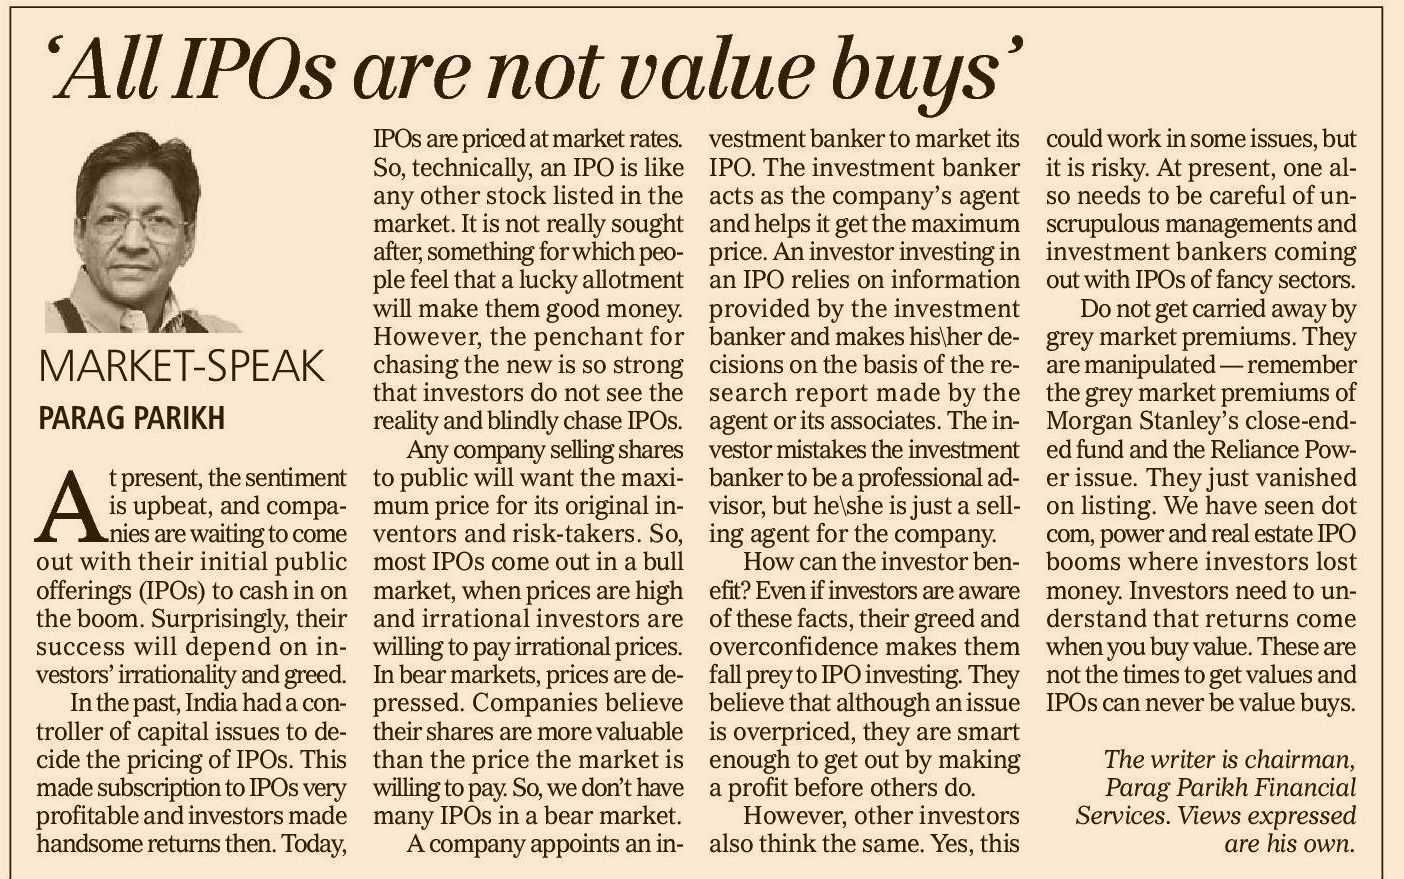 All IPOs are not value buys